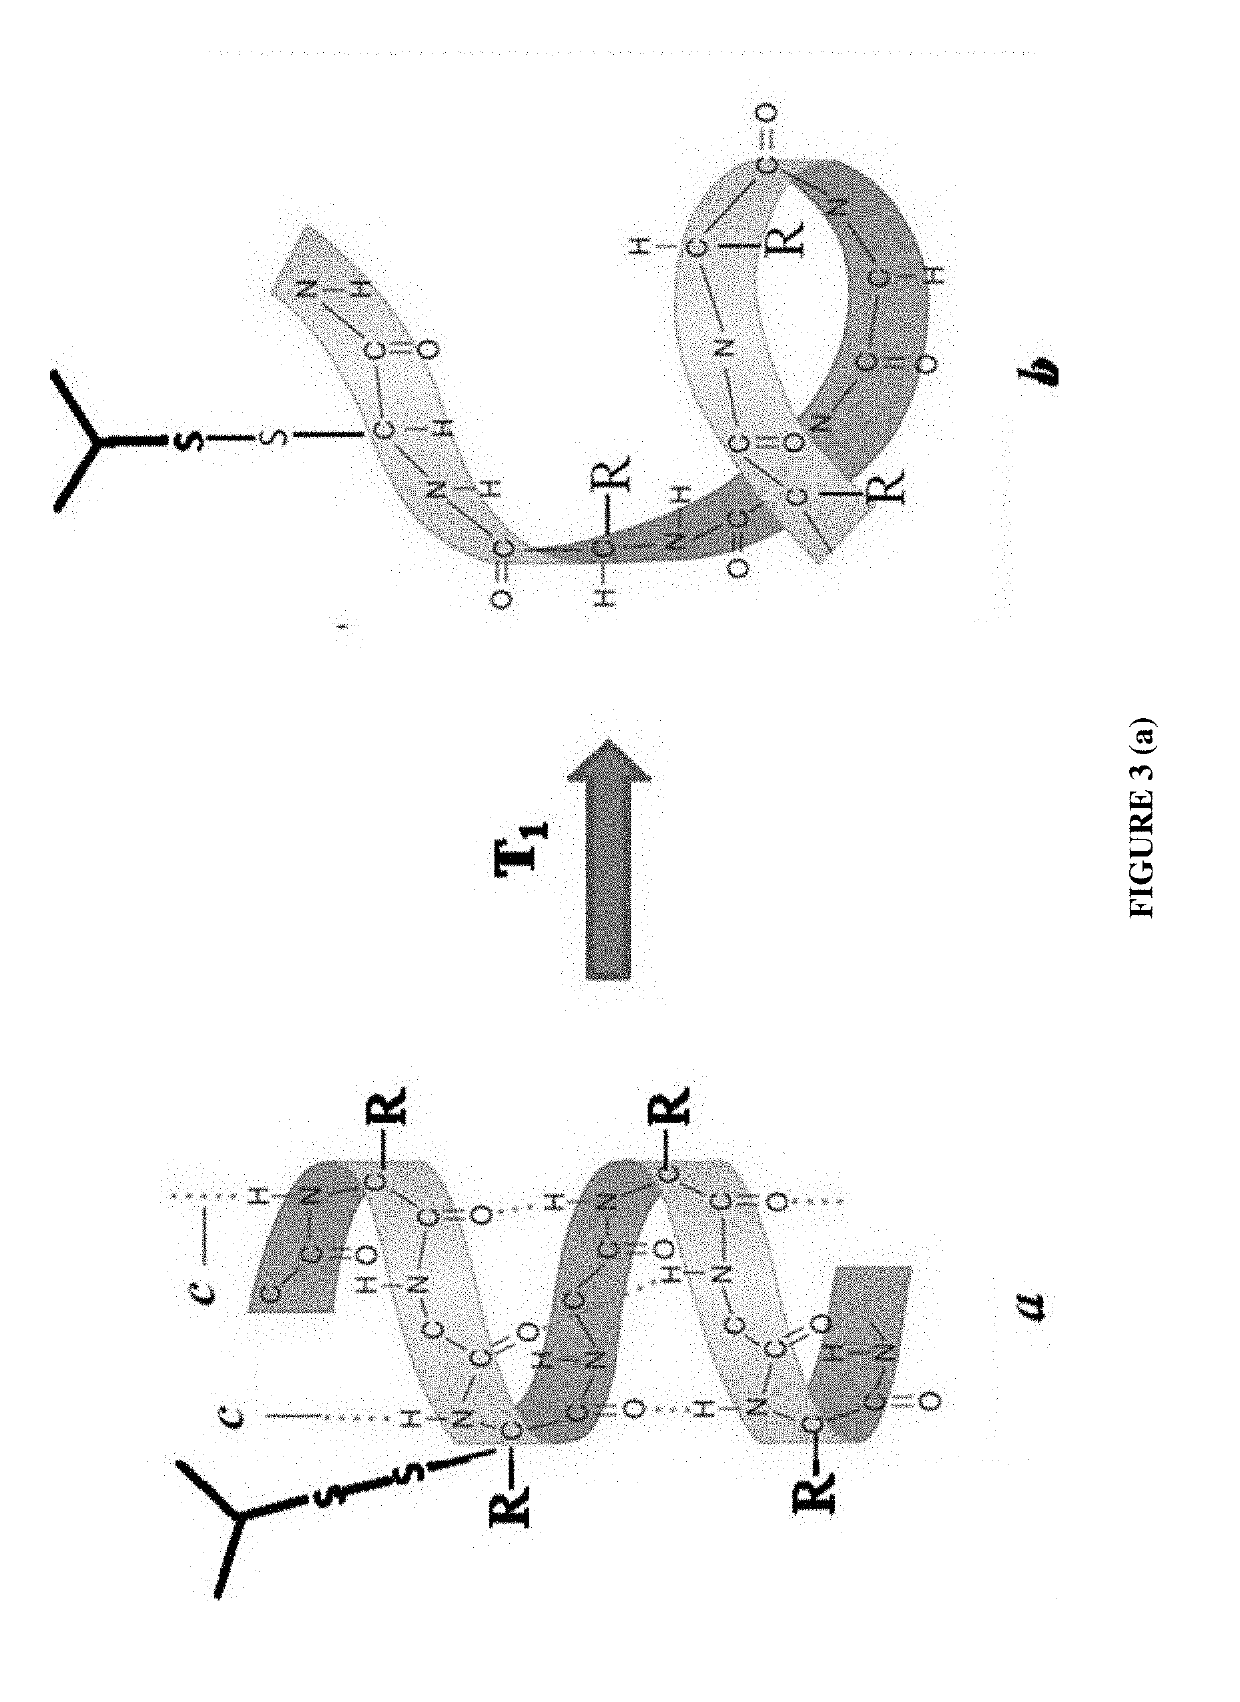 Process to extract and recover keratin and keratin associated protein from animal body parts